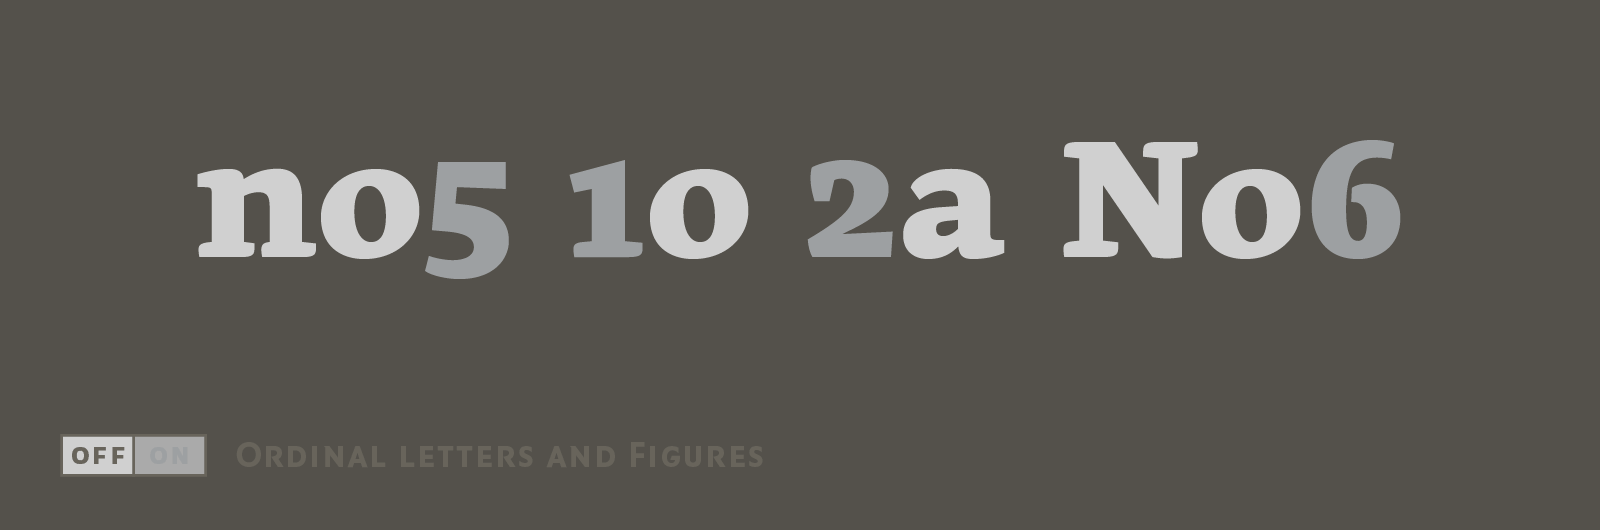 Ordinal letters and figures